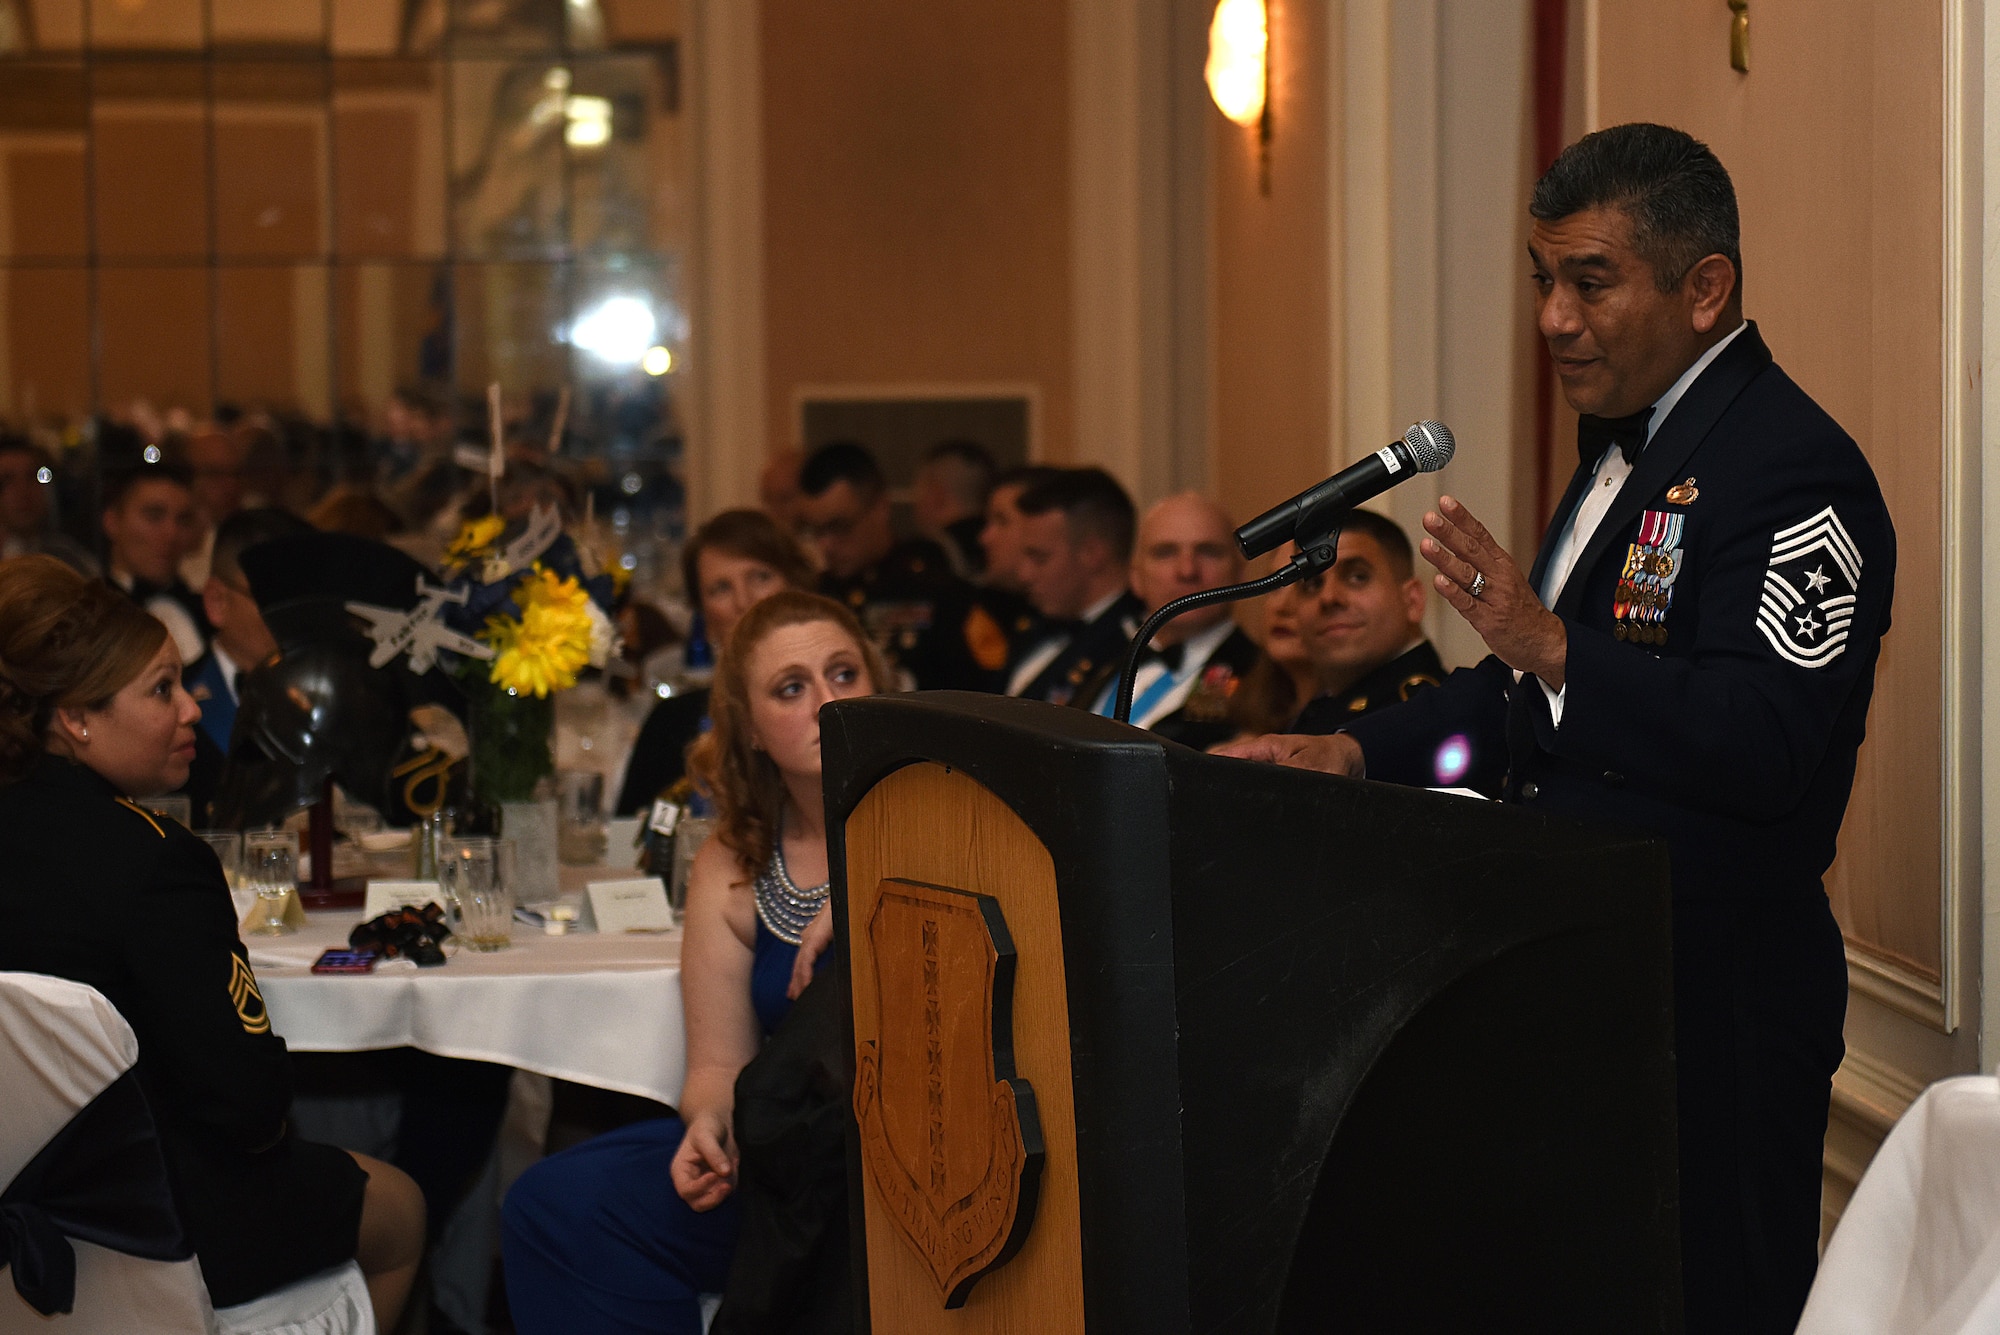 U.S. Air Force Retired Chief Master Sgt. Gerardo Tapia, Annual Awards guest speaker, delivers a speech about the ‘one degree’ that defines the annual award nominees during the Annual Awards Banquet at the Cactus Hotel in San Angelo, Texas, Feb. 3, 2017. The 17th Training Wing Command presented a 200 dollar check to Tapia for the Air Force Enlisted Village. (U.S. Air Force photo by Airman 1st Class Caelynn Ferguson/Released)